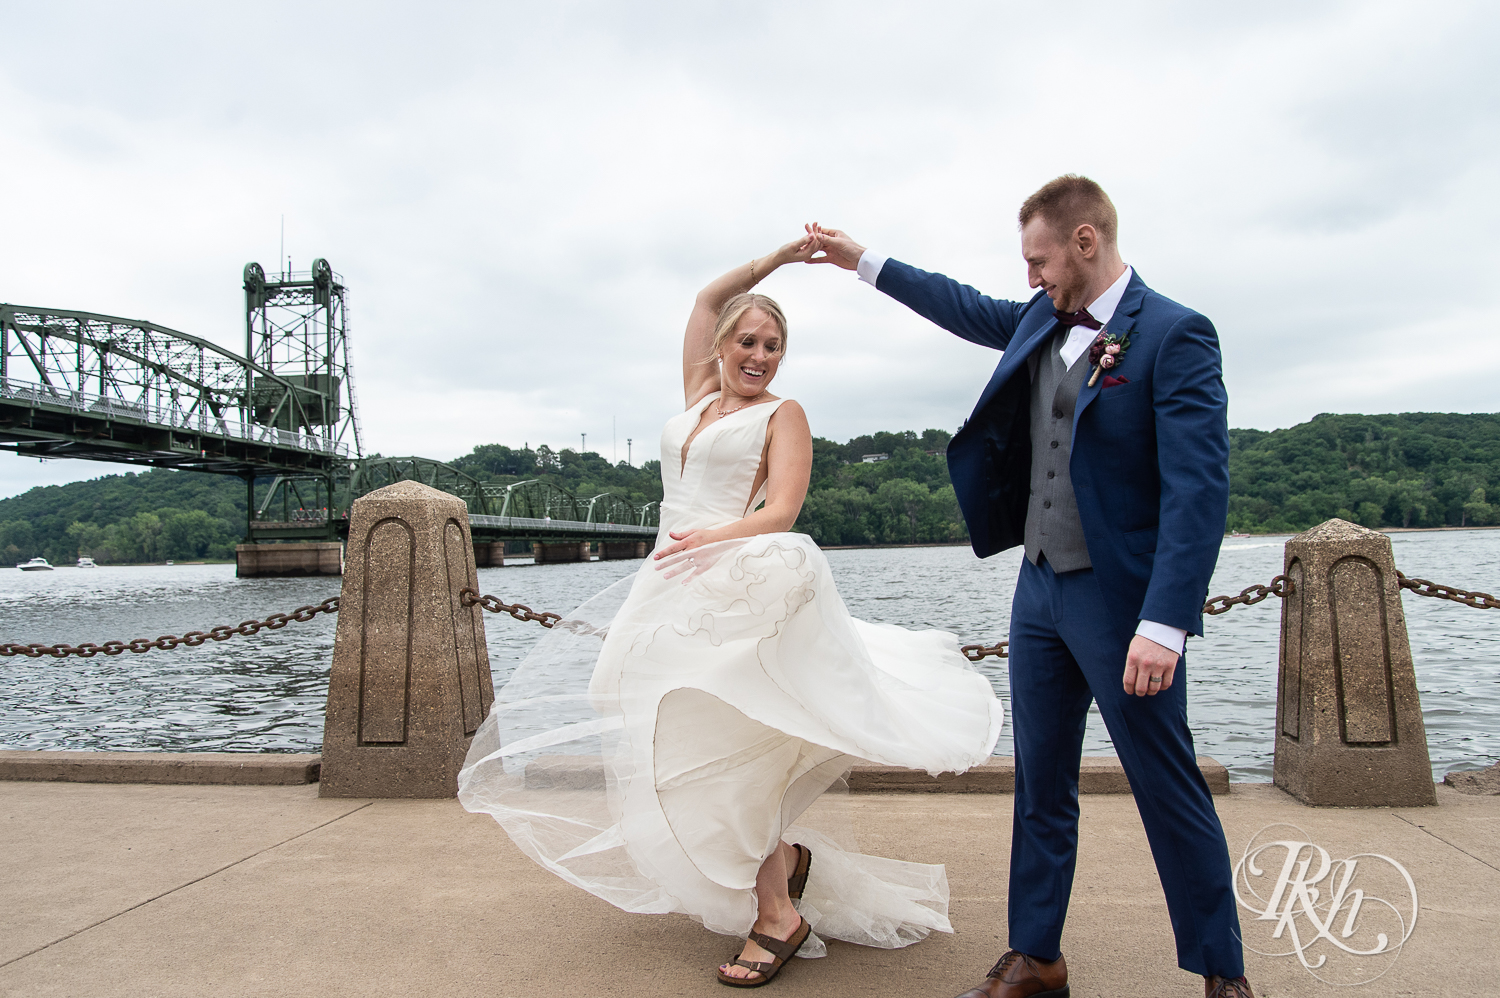 Bride and groom dance in front of St. Croix River in Stillwater, Minnesota.